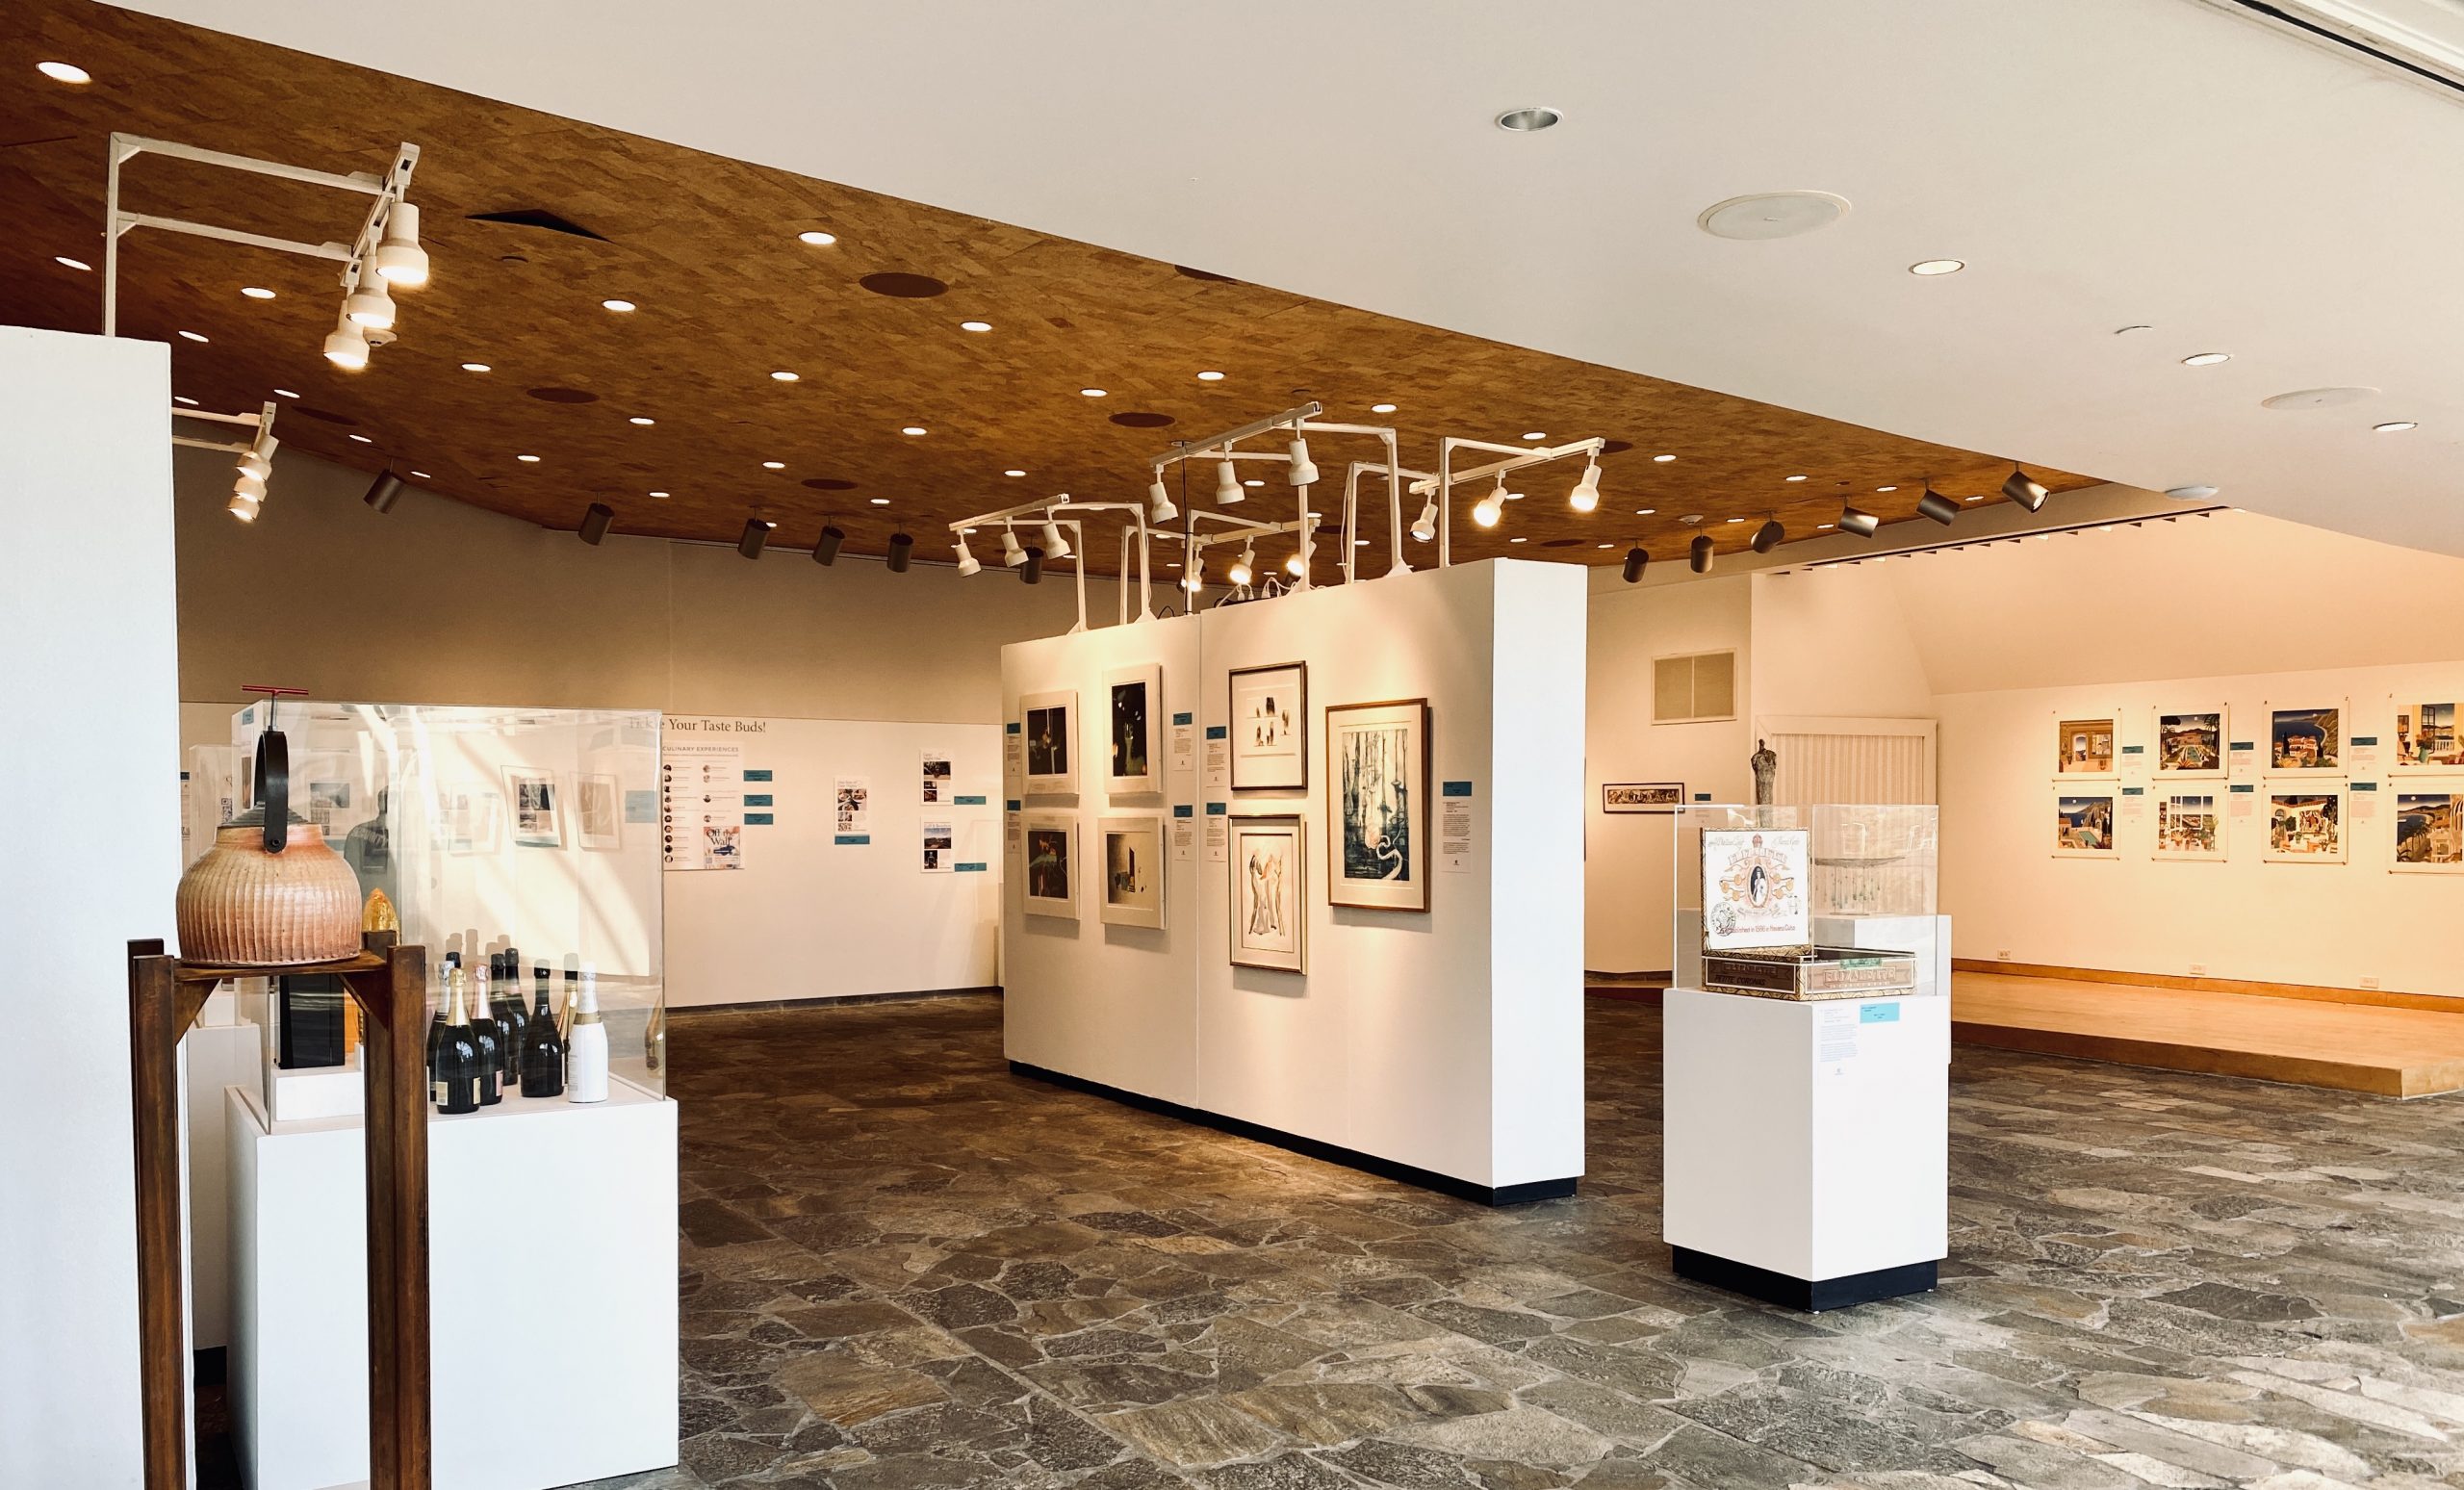 View of the Hunter Museum auditorium with artwork hanging.